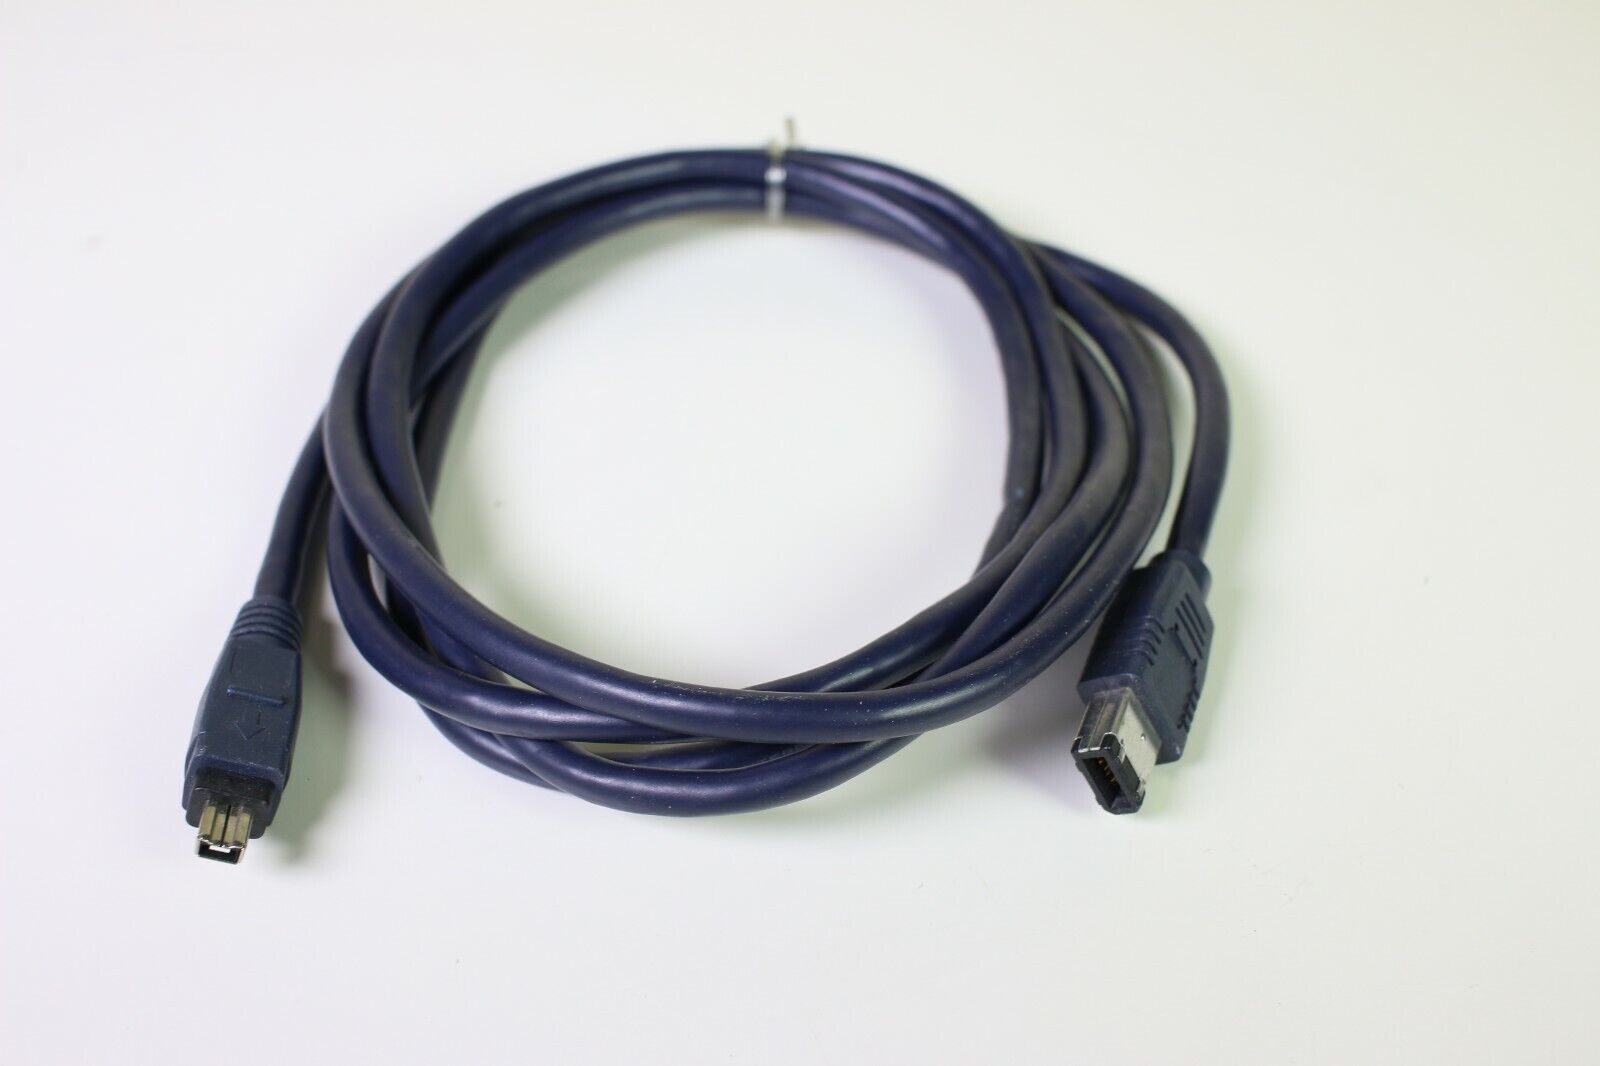 Firewire 6 Pin to Firewire 4 Pin Cable - 6 Feet Length - Very Good Condition